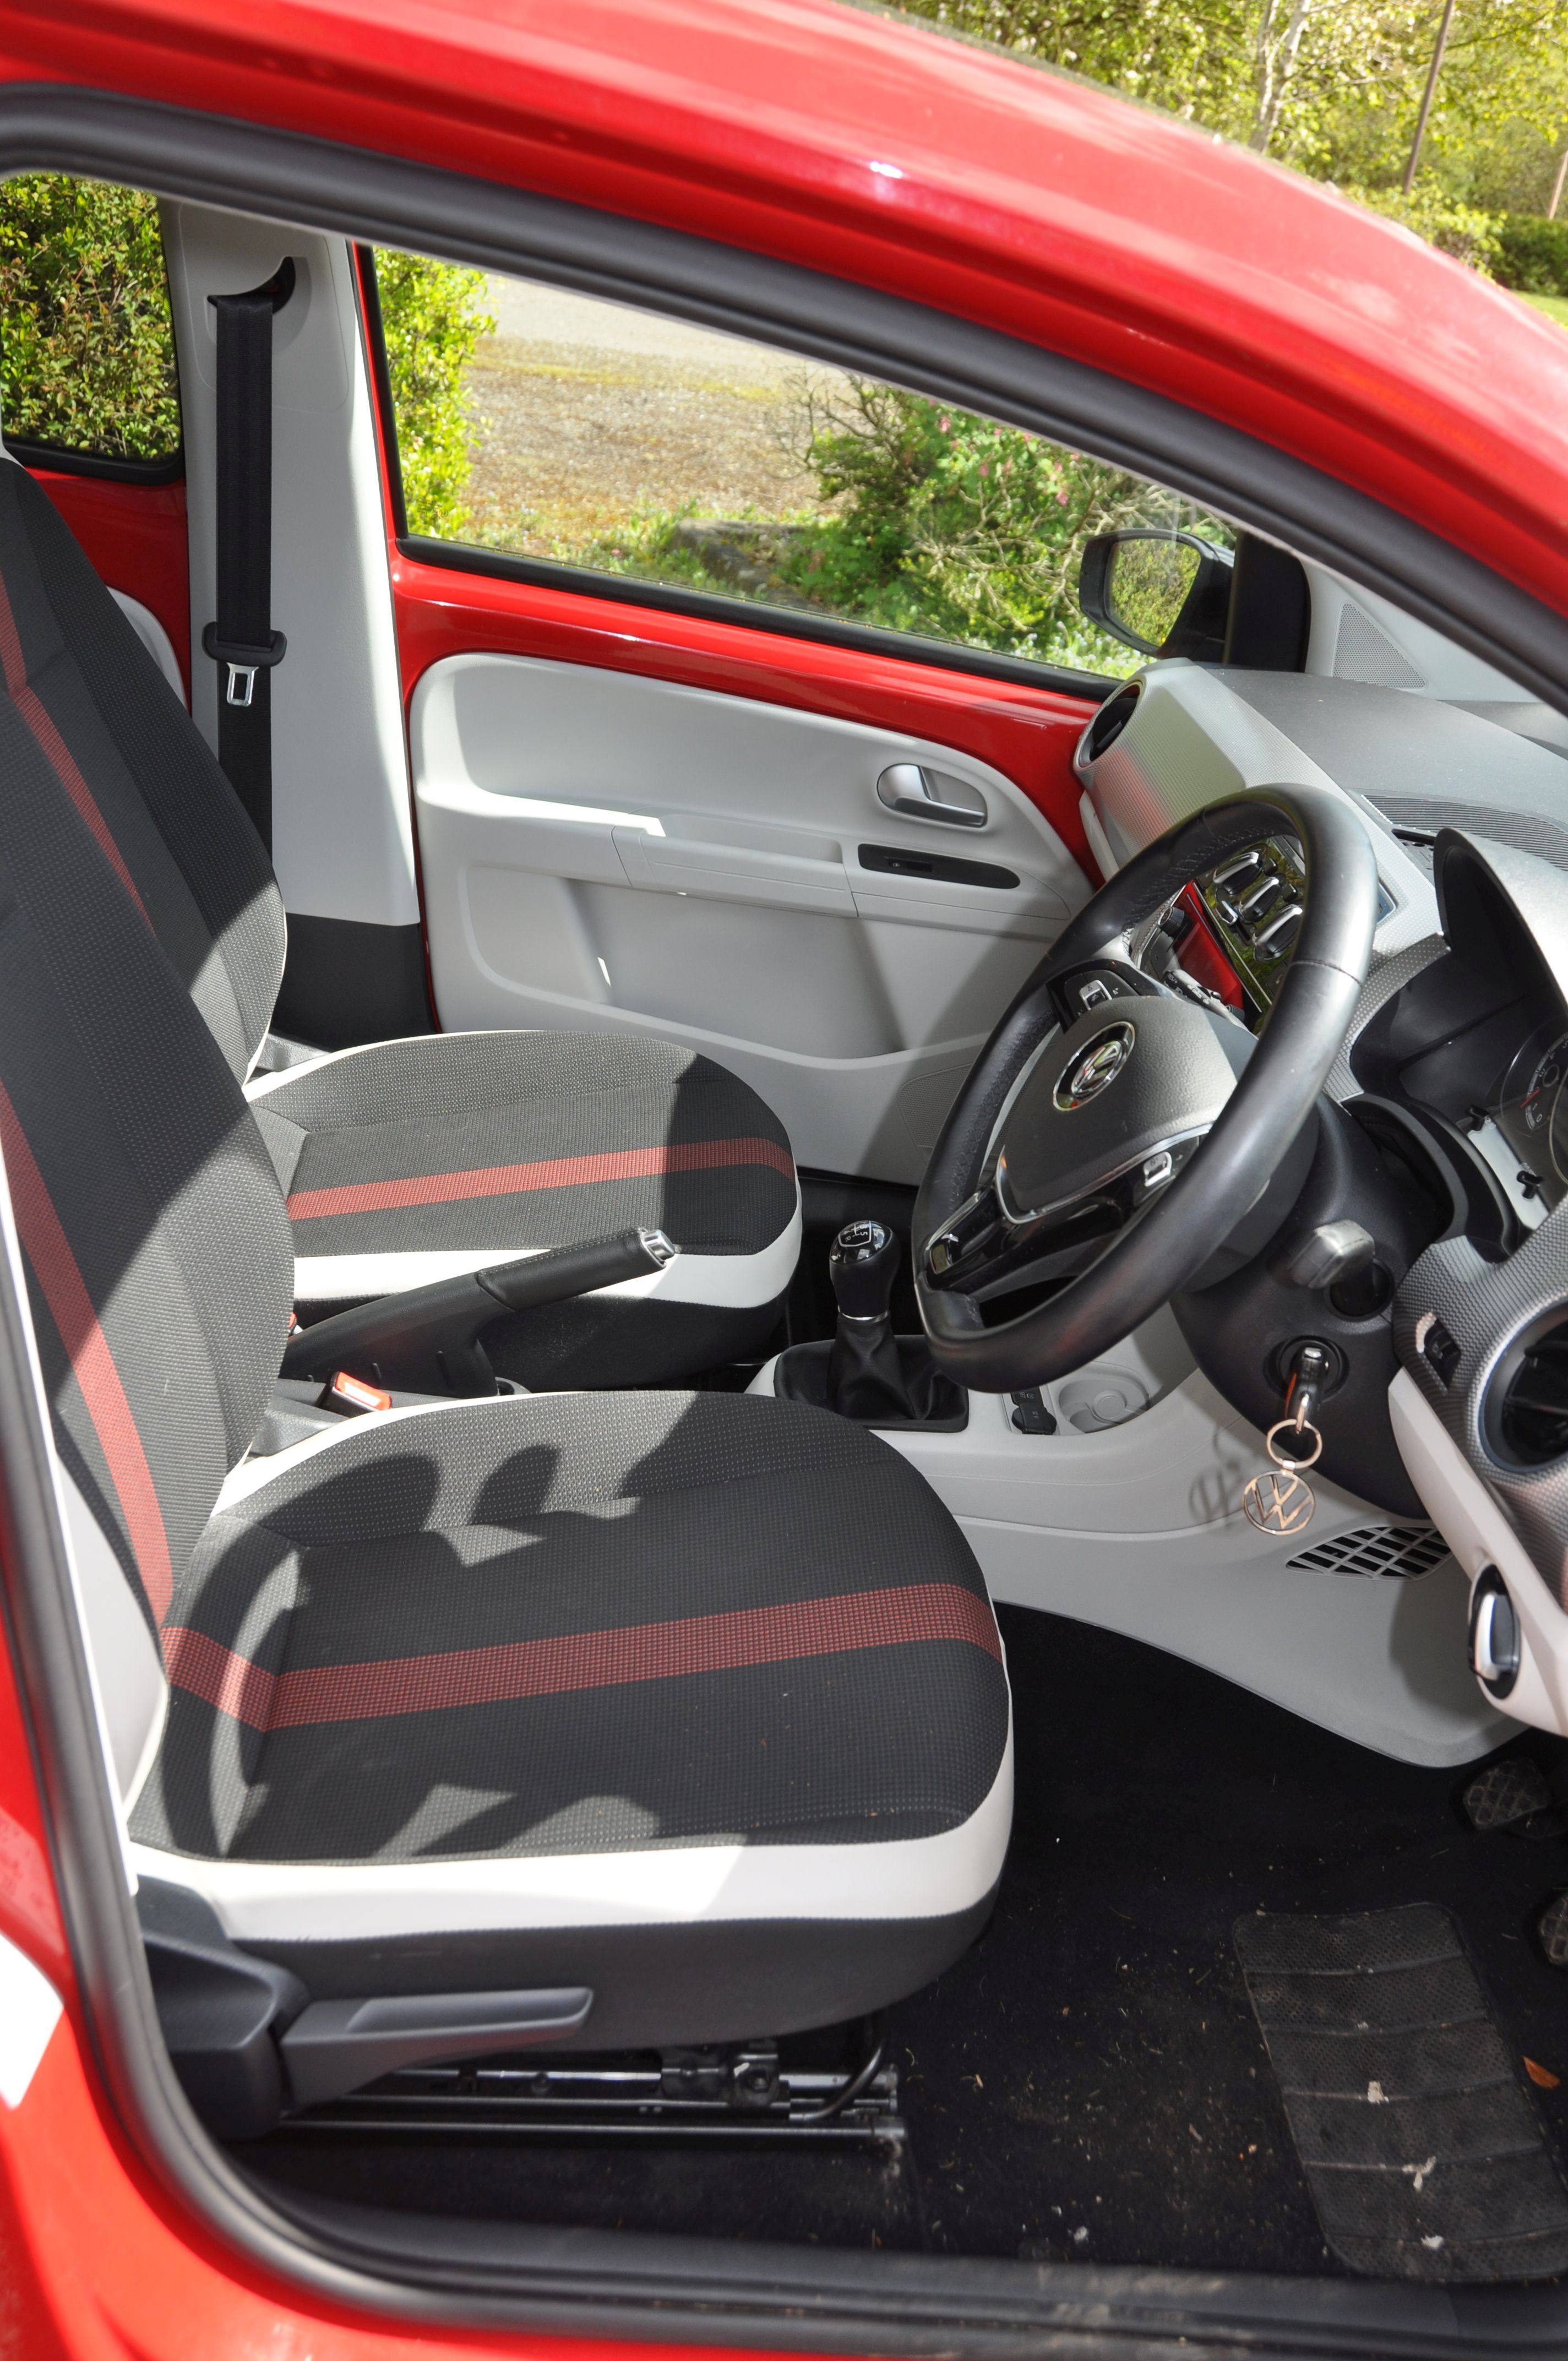 A 2019 VW UP 5 DOOR HATCHBACK CAR IN RED. 999cc petrol engine, 5 speed manual gearbox, V5c - Image 5 of 9